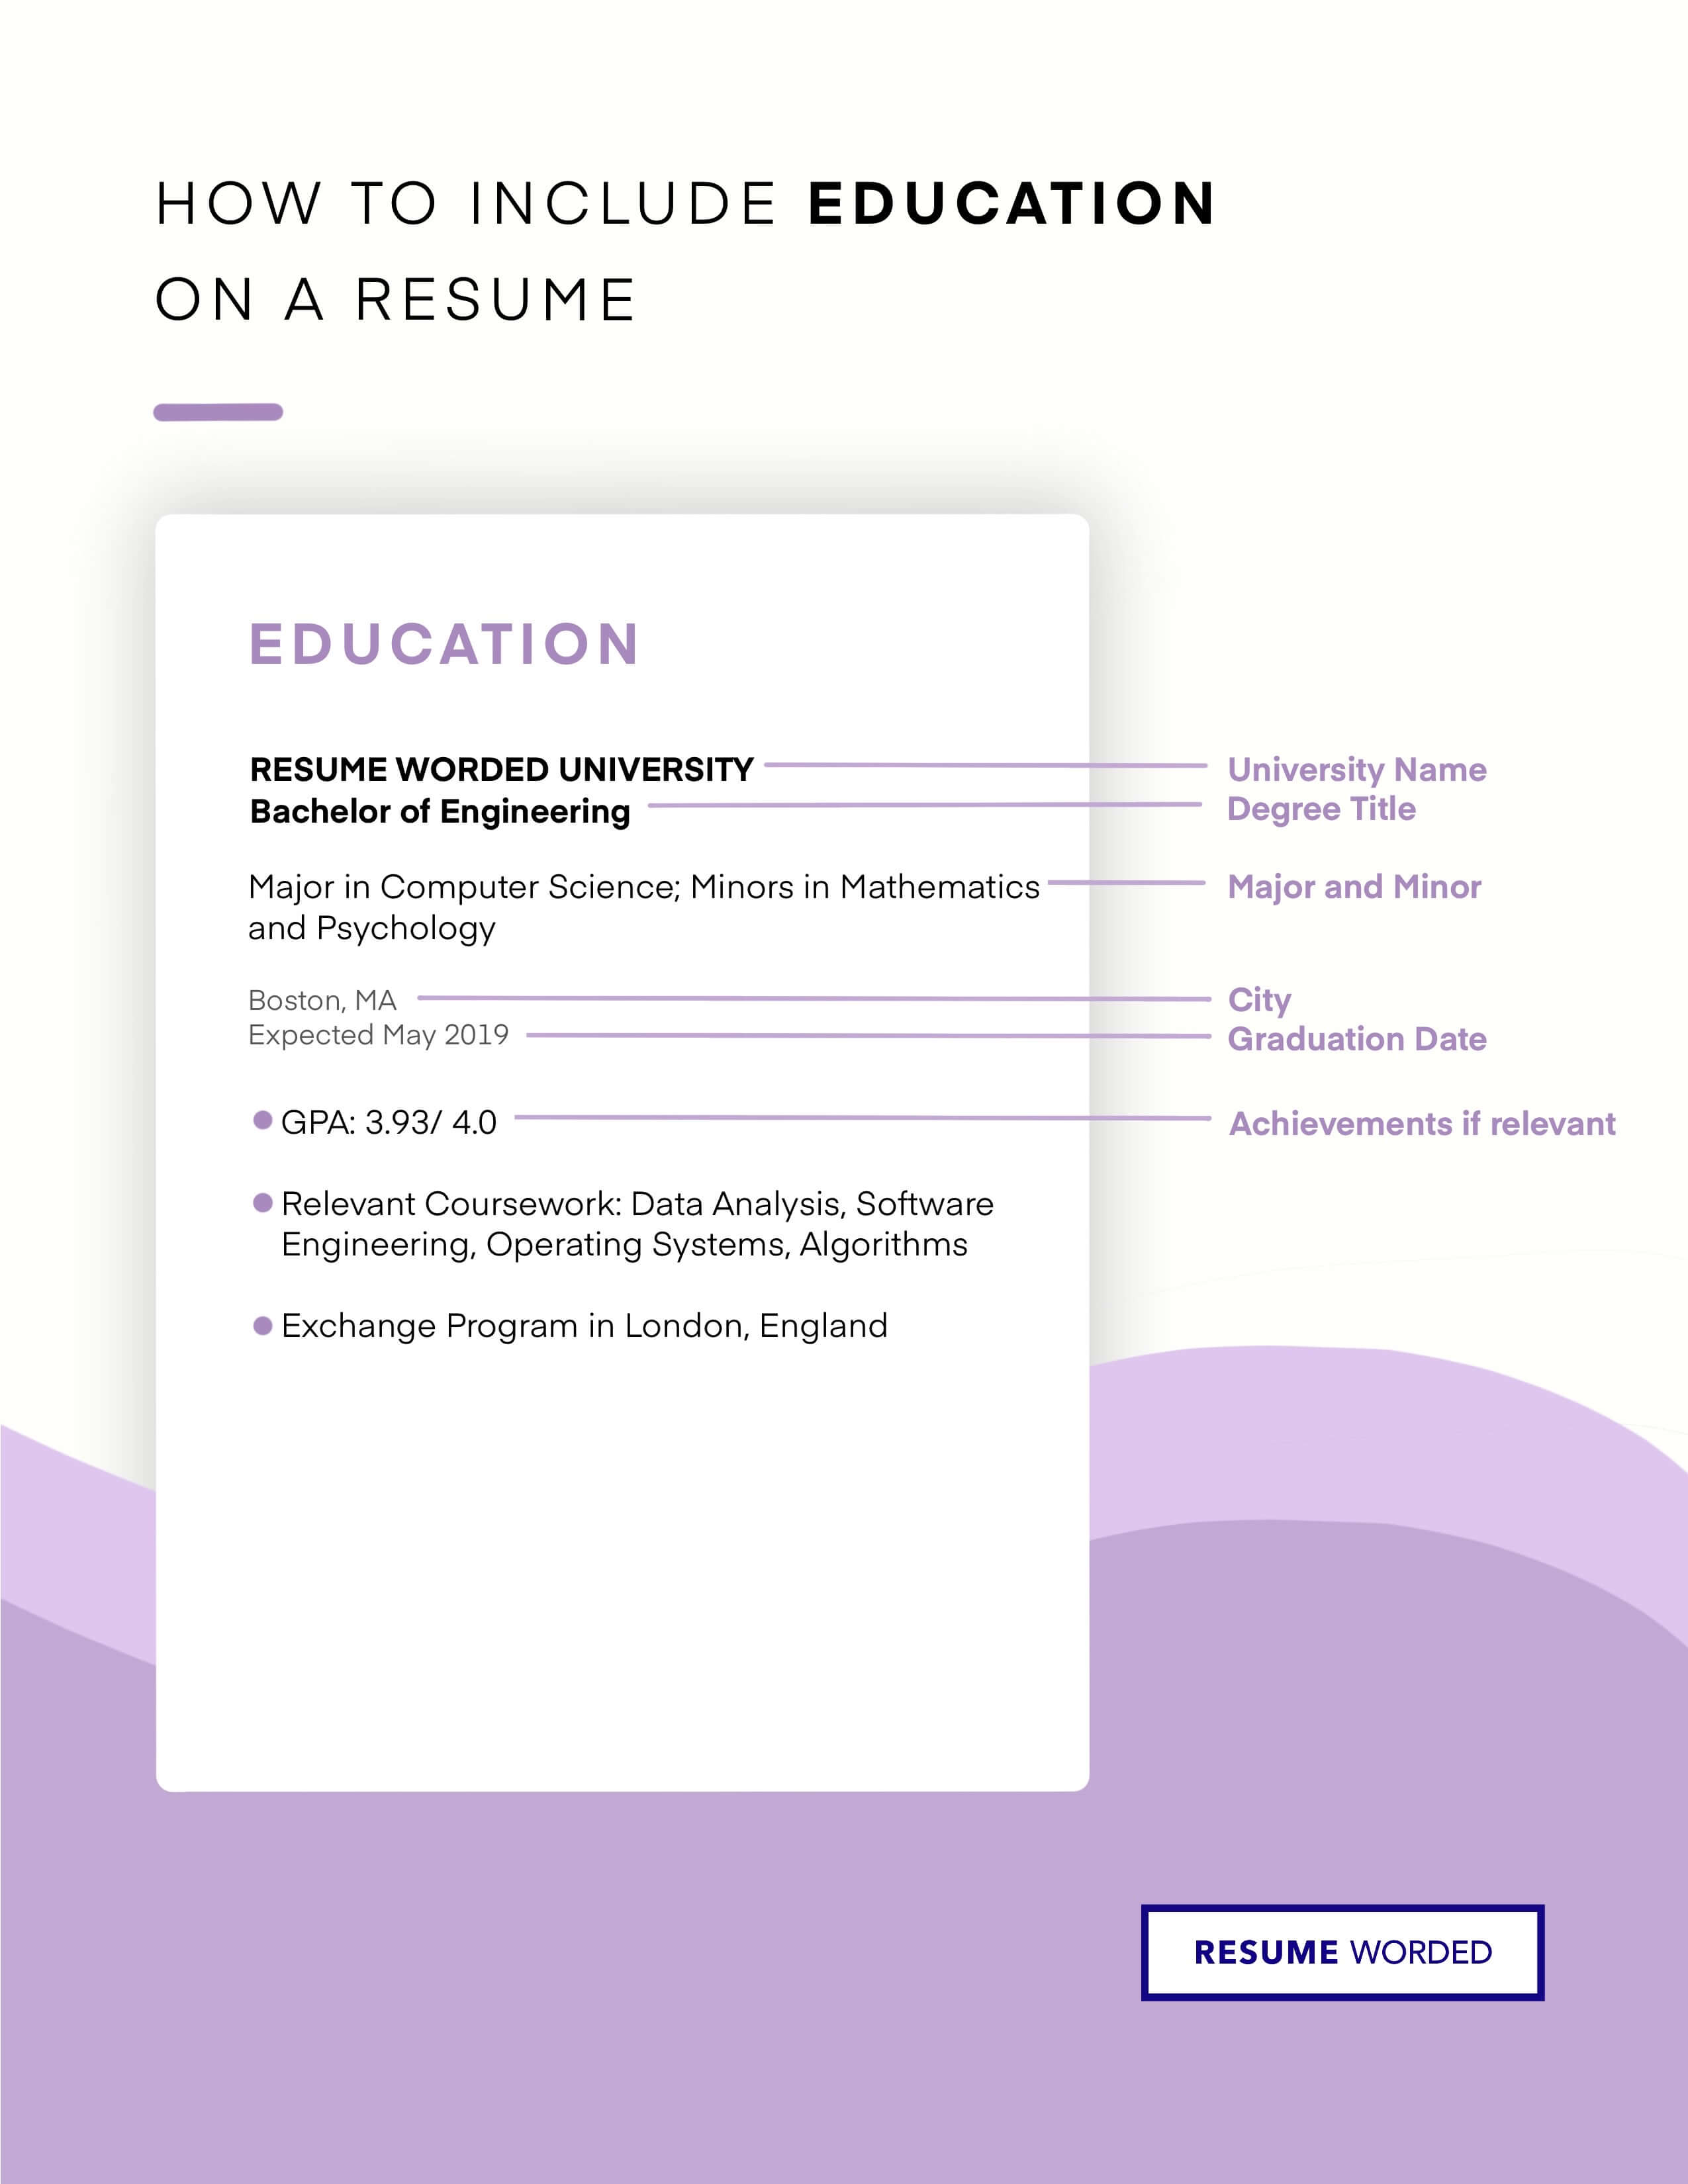 Highlight education and certifications in network engineering - Wireless Network Engineer Resume